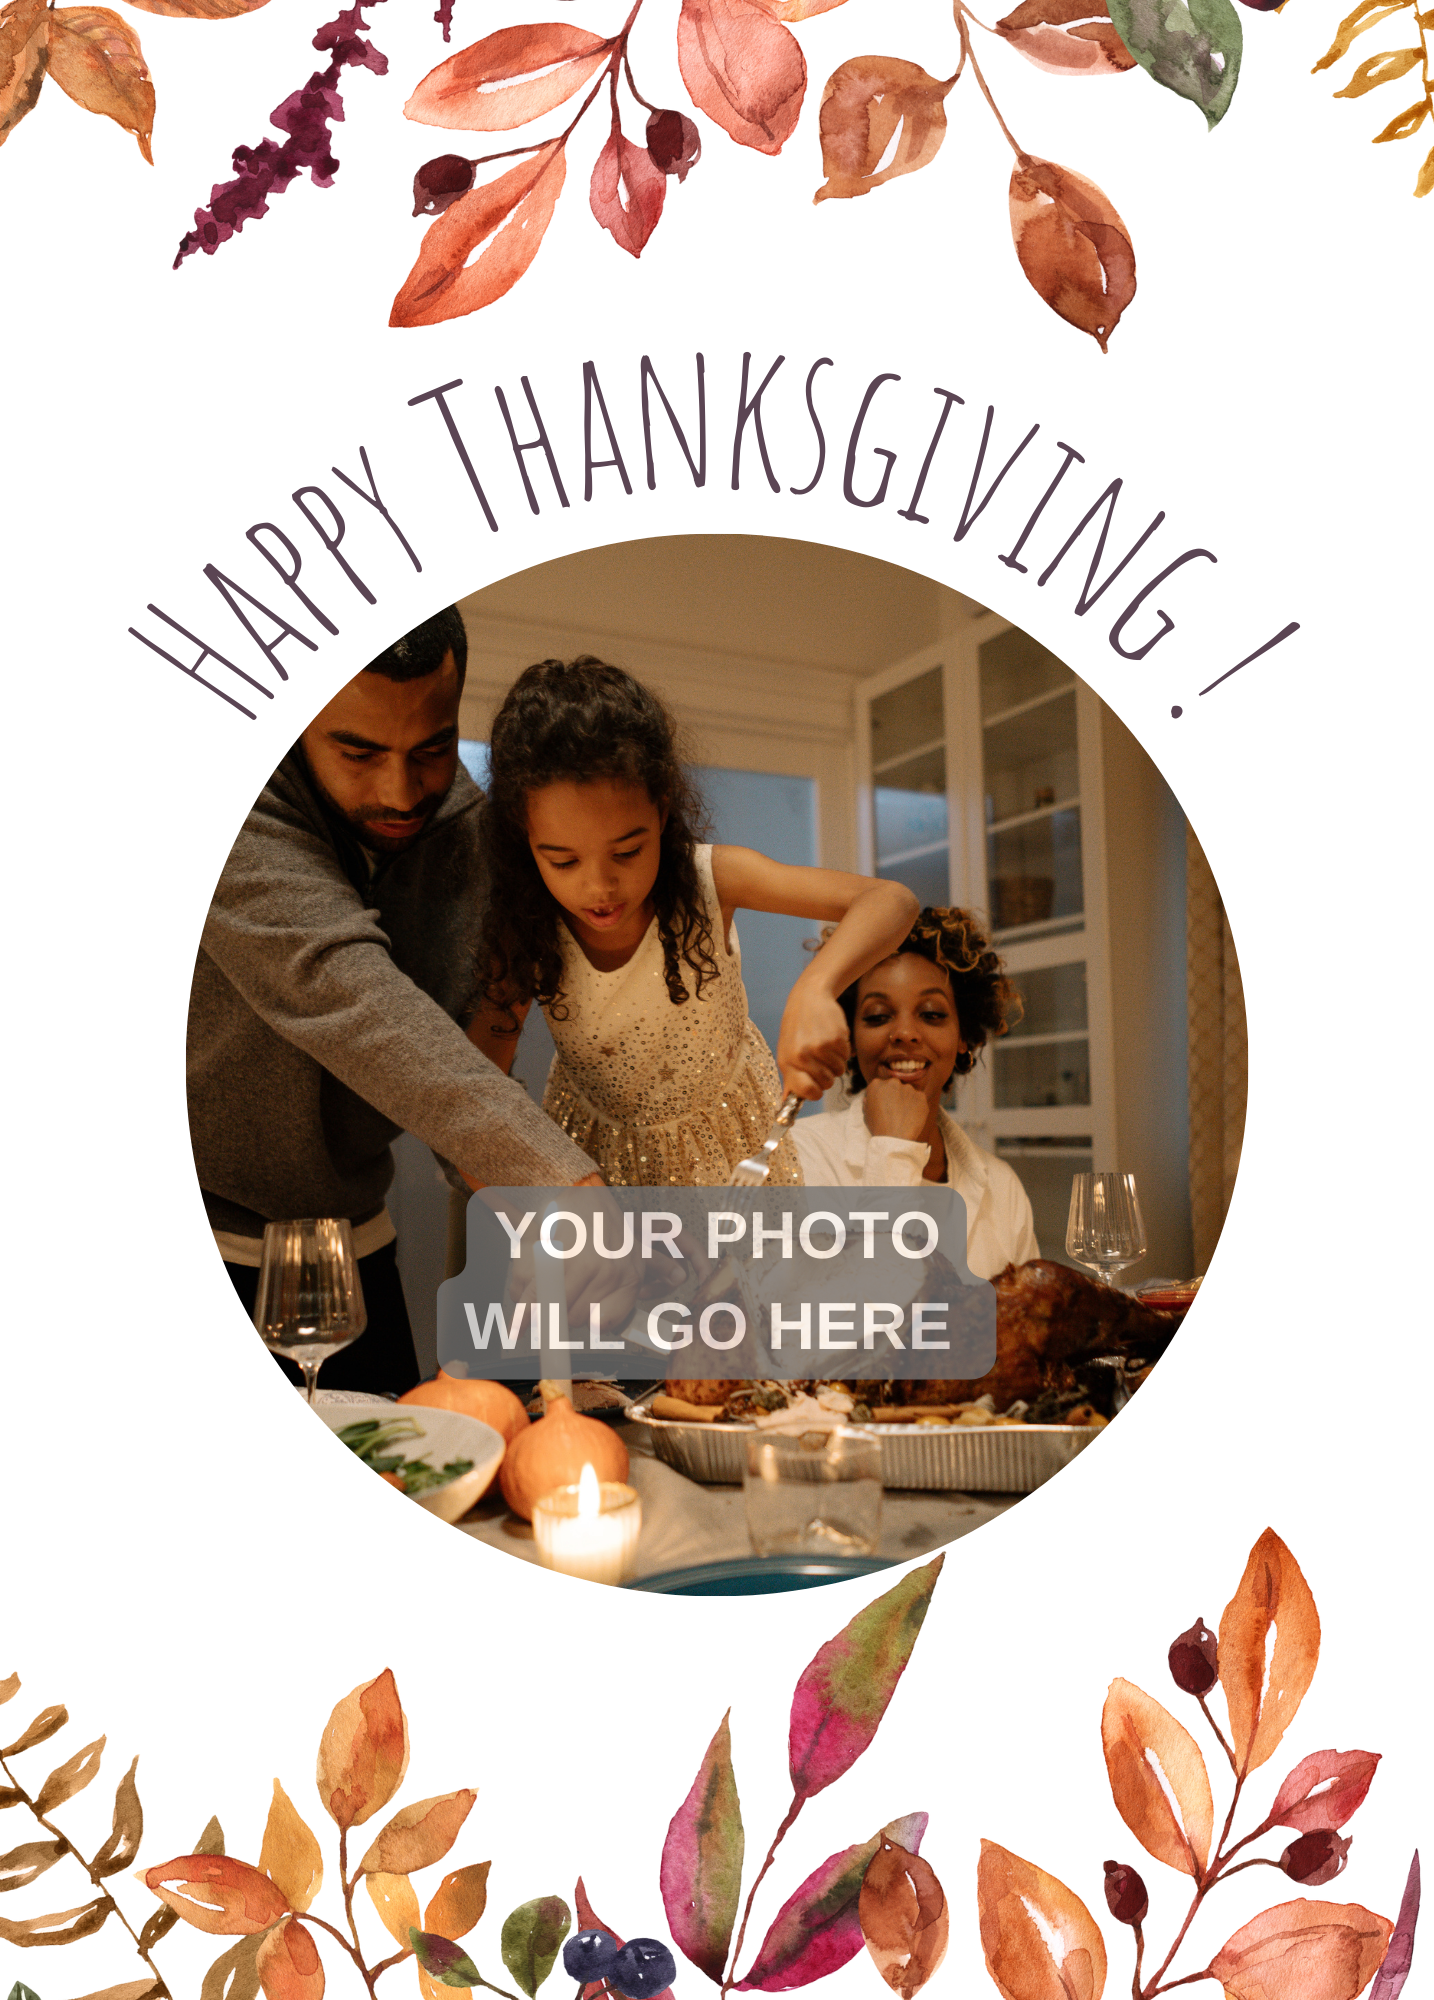 Happy Thanksgiving Photo Card - Personalized Greeting Card for Someone in Jail or Prison